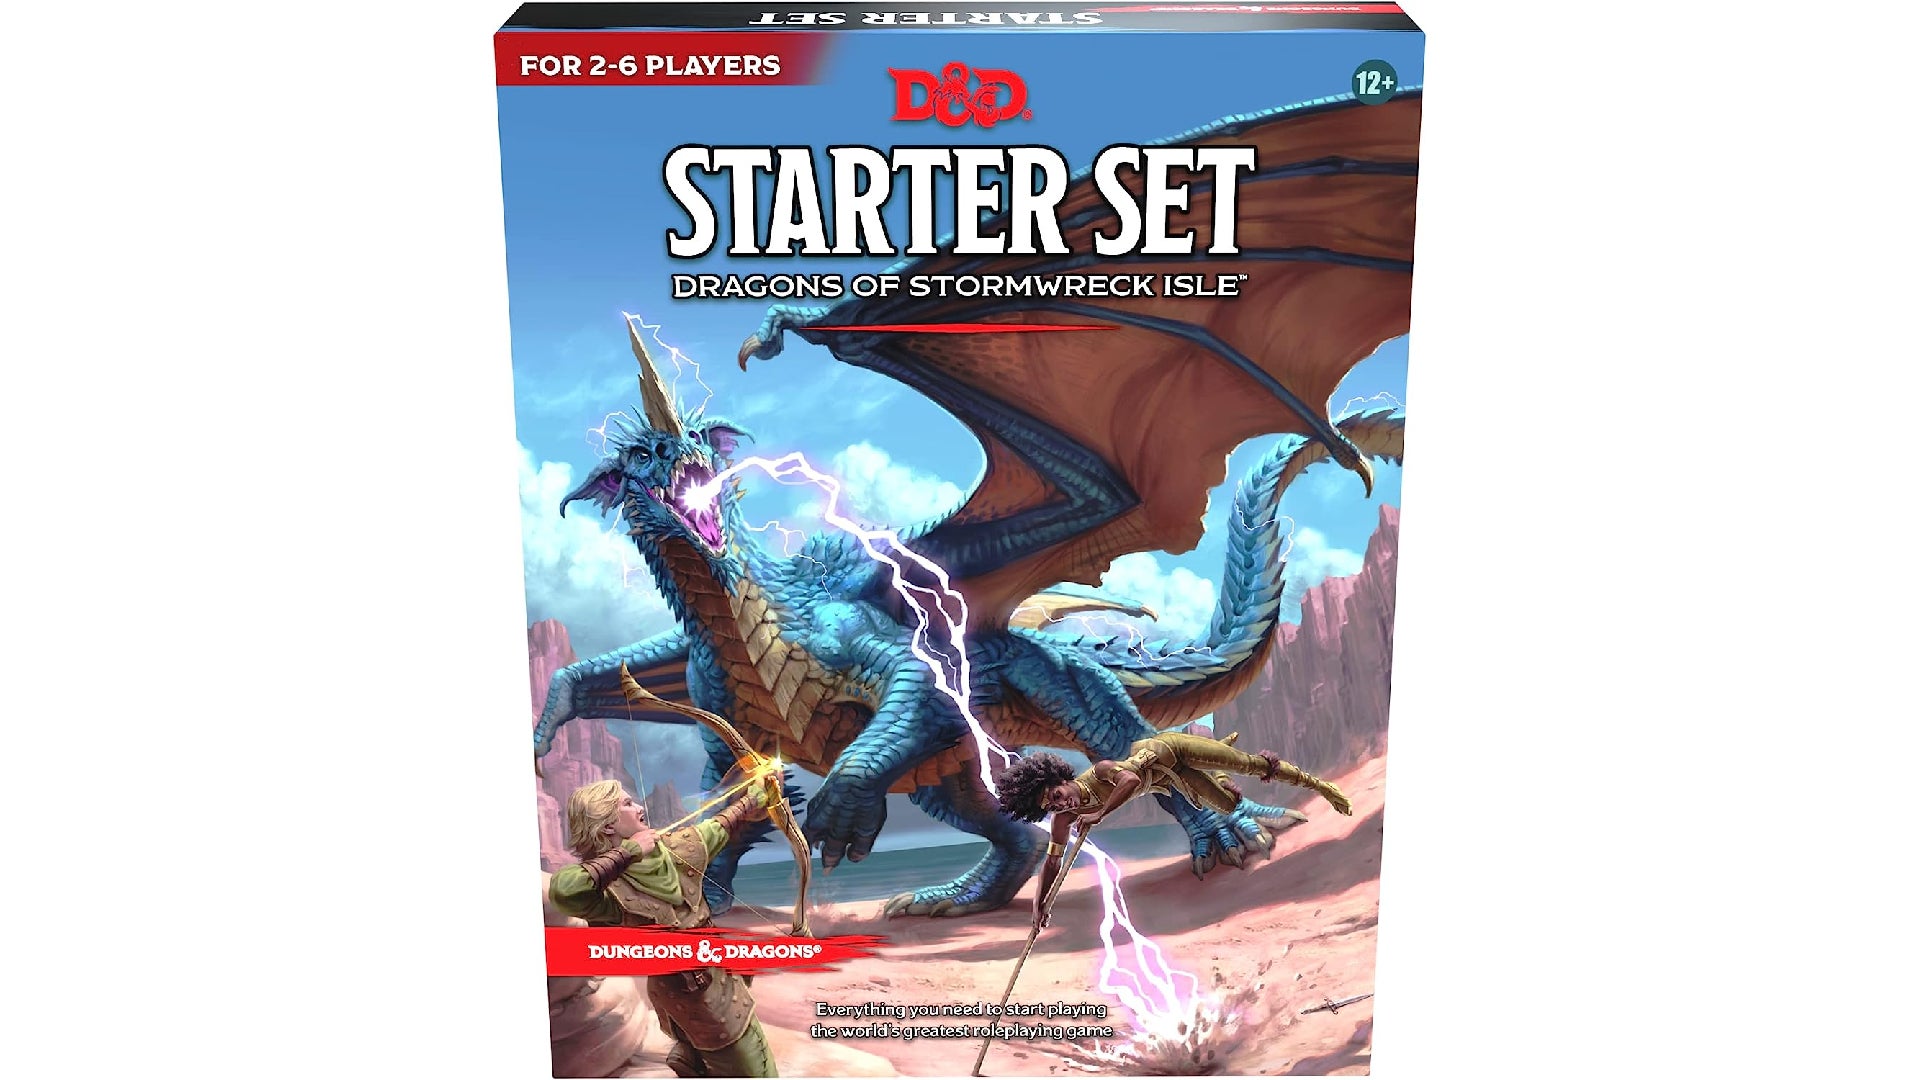 The Cover art of the D&amp;D 5E Starter Set Stormwreck Isle